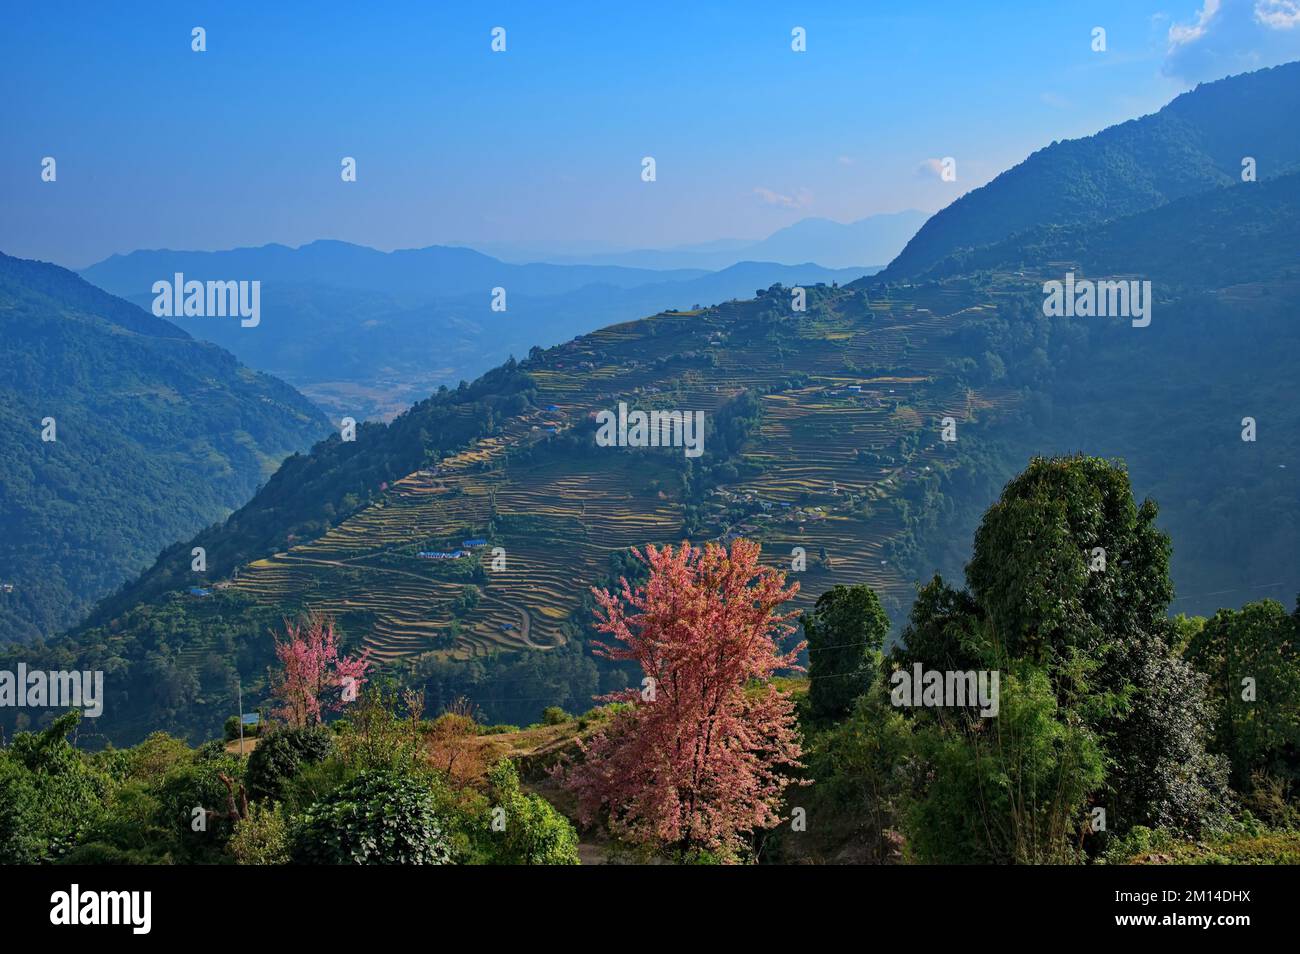 Scenic view of cultivated hills in Annapurna massif, Nepal Stock Photo